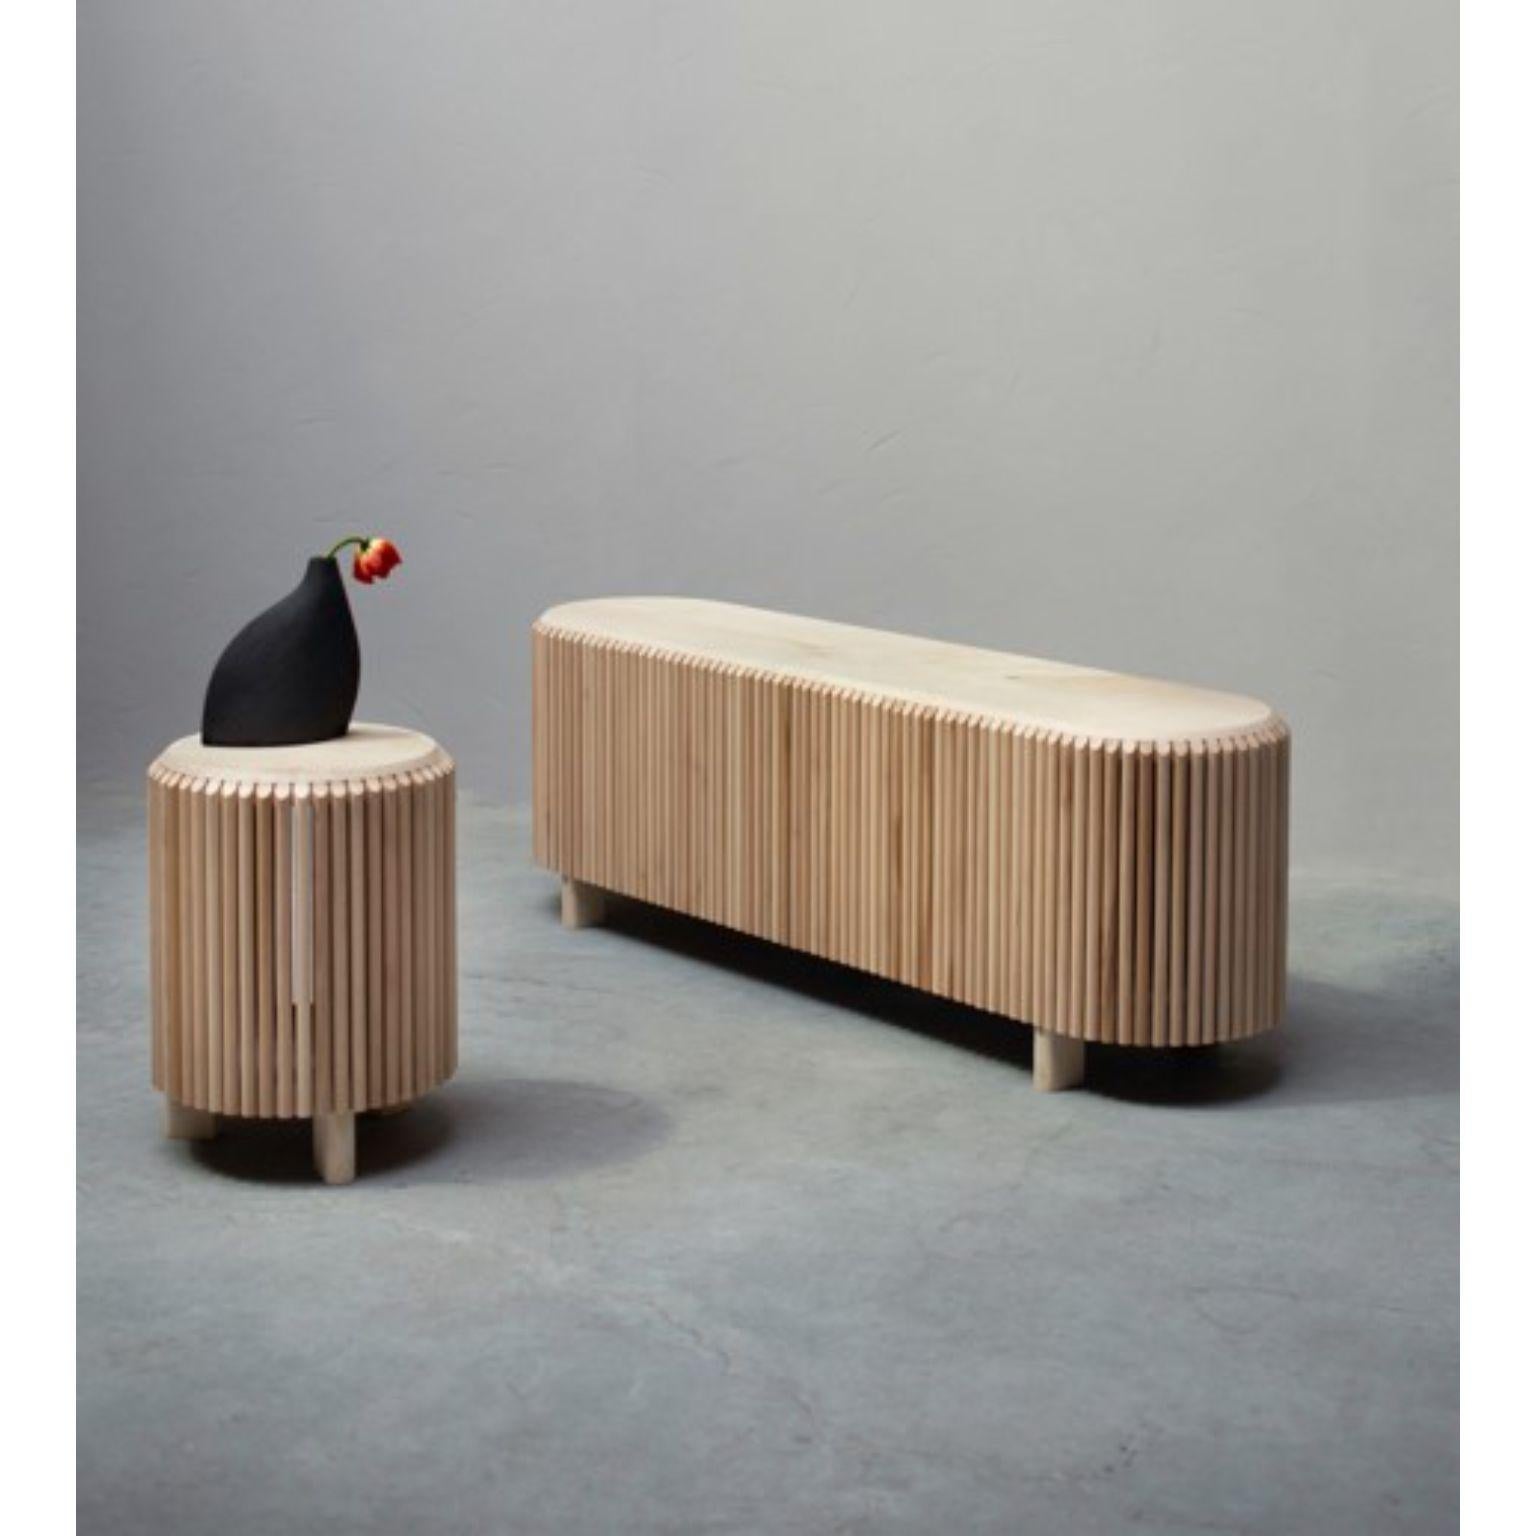 Set of 2 Roseaux Bench and Stool by Alexandre Labruyère
Current Production
Dimensions: D136 x W36 x H45 cm // D36 x H45
Materials: Sycamore, beech / Natural oil protection.

*vase not included
Like a curtain of reeds, the rhythm created by the